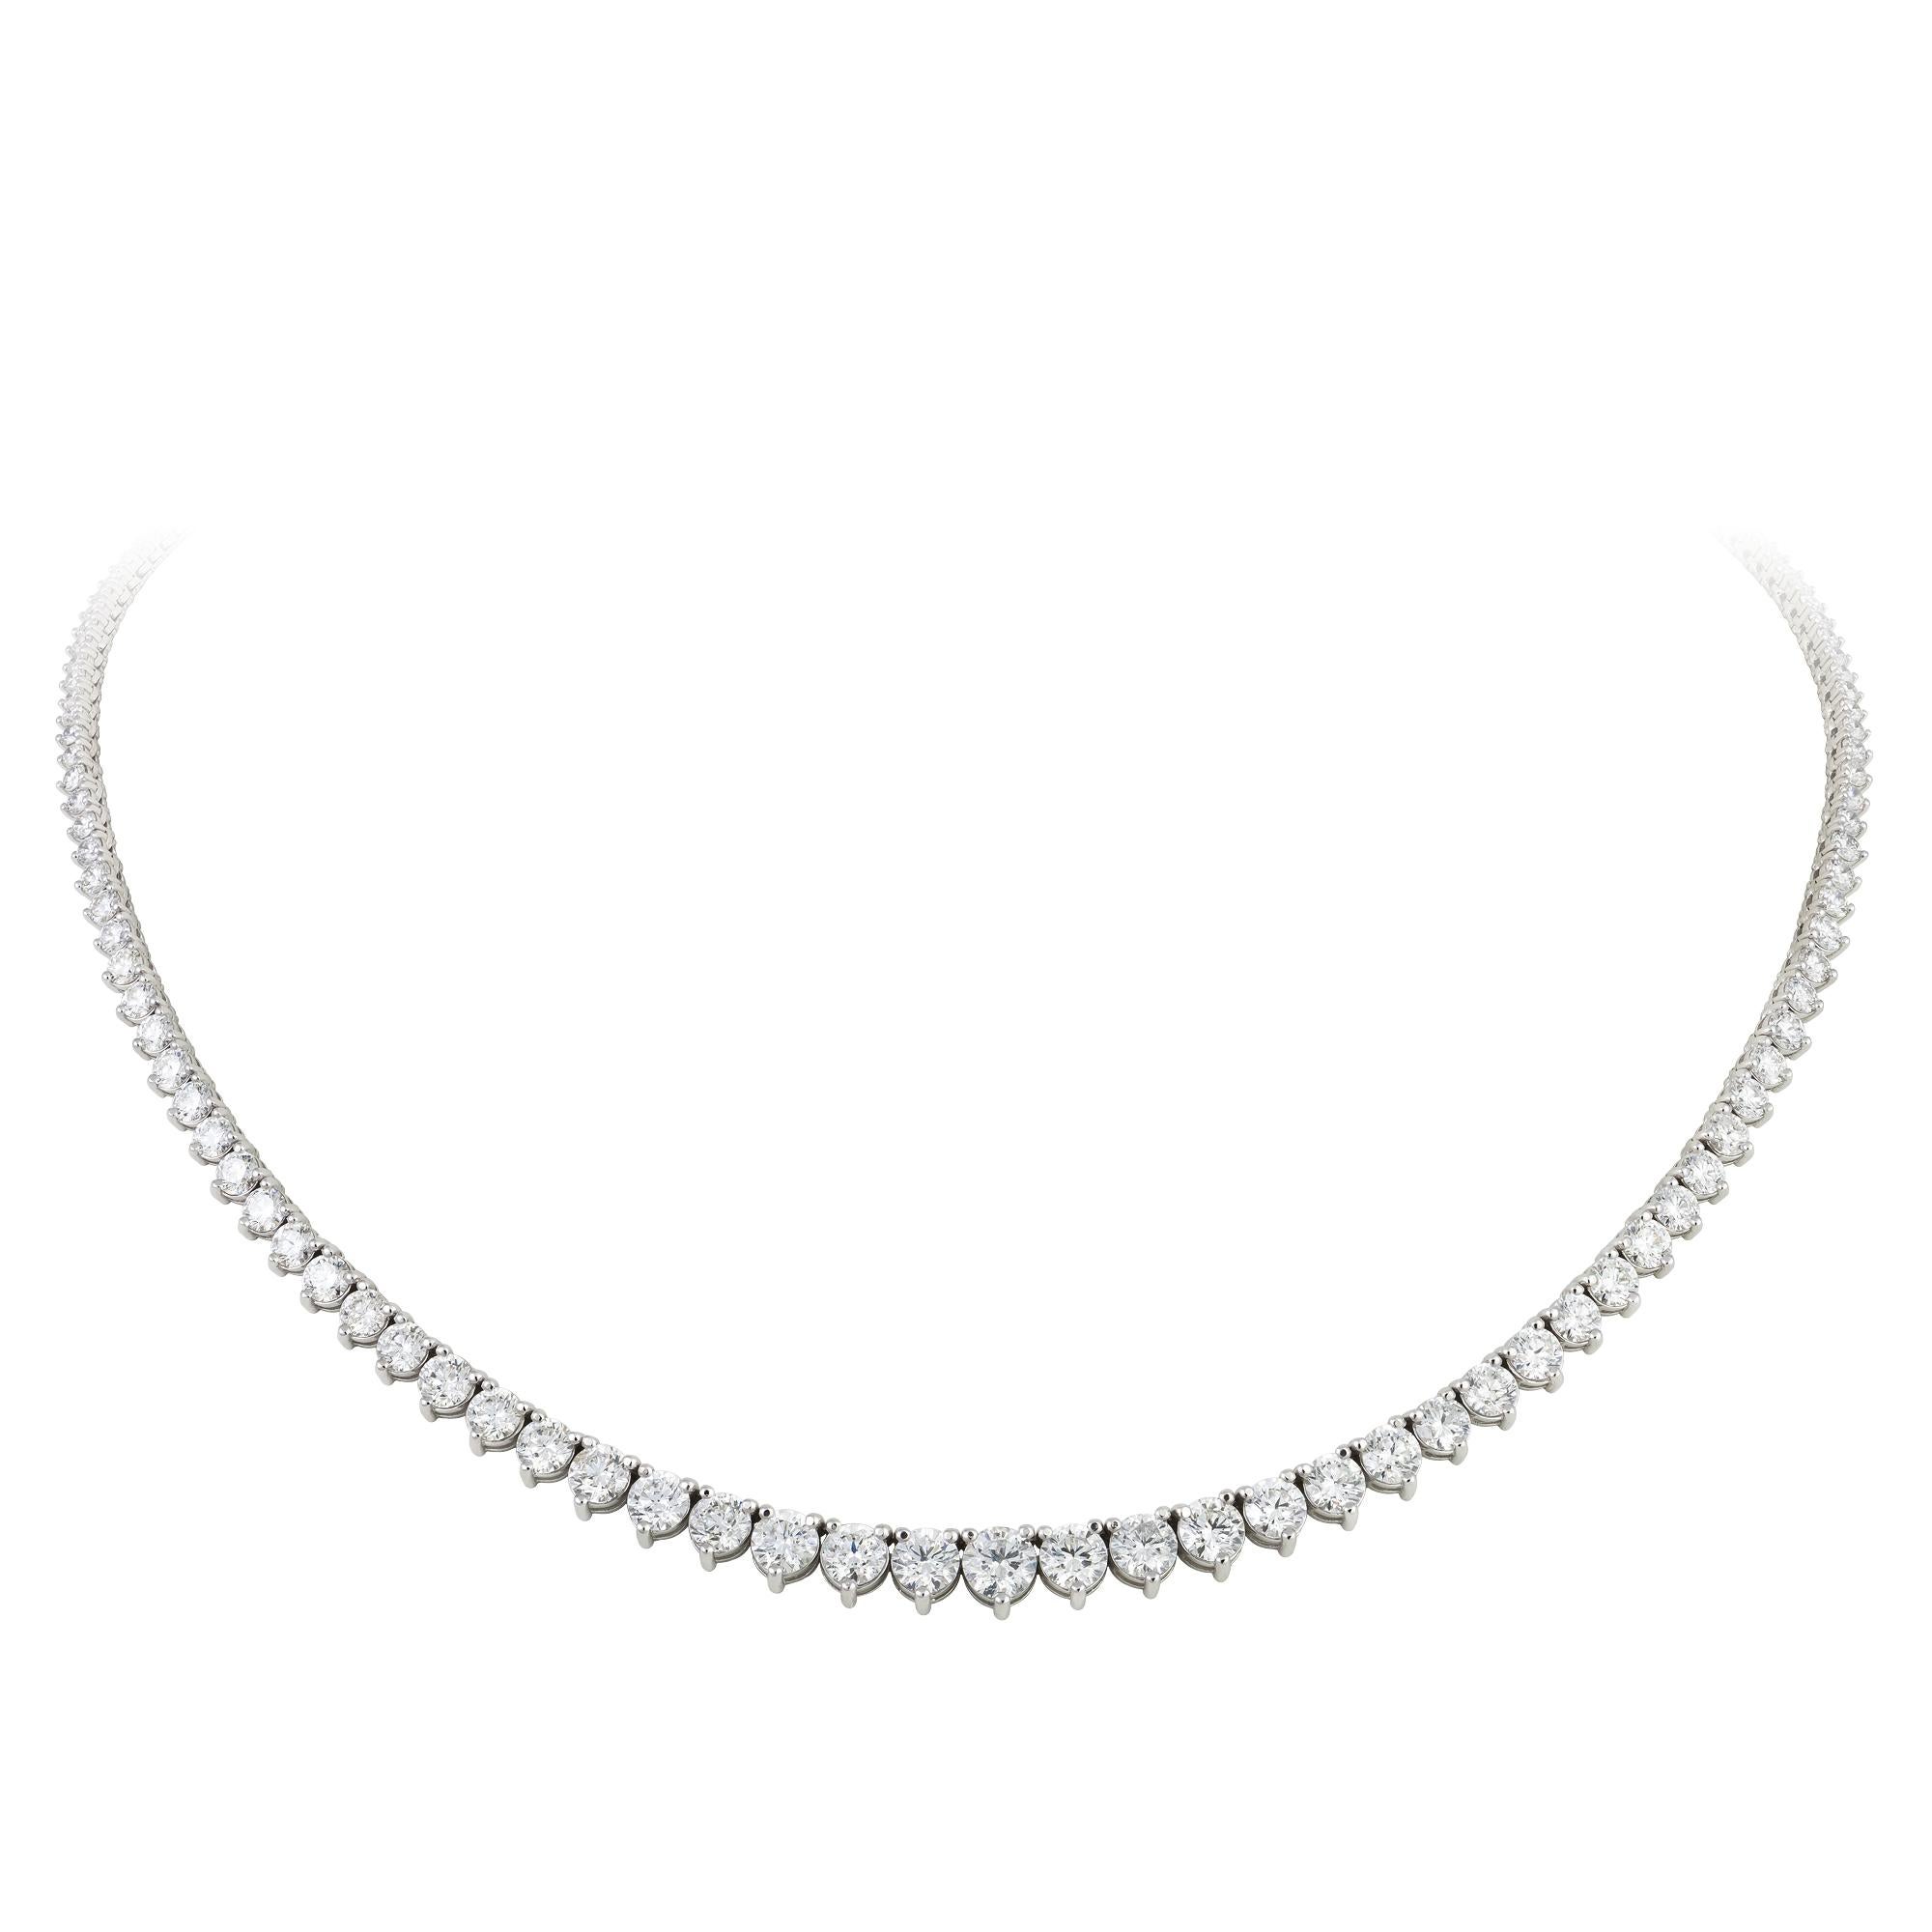 Modern Unique White Gold 18K Necklace Diamond for Her For Sale